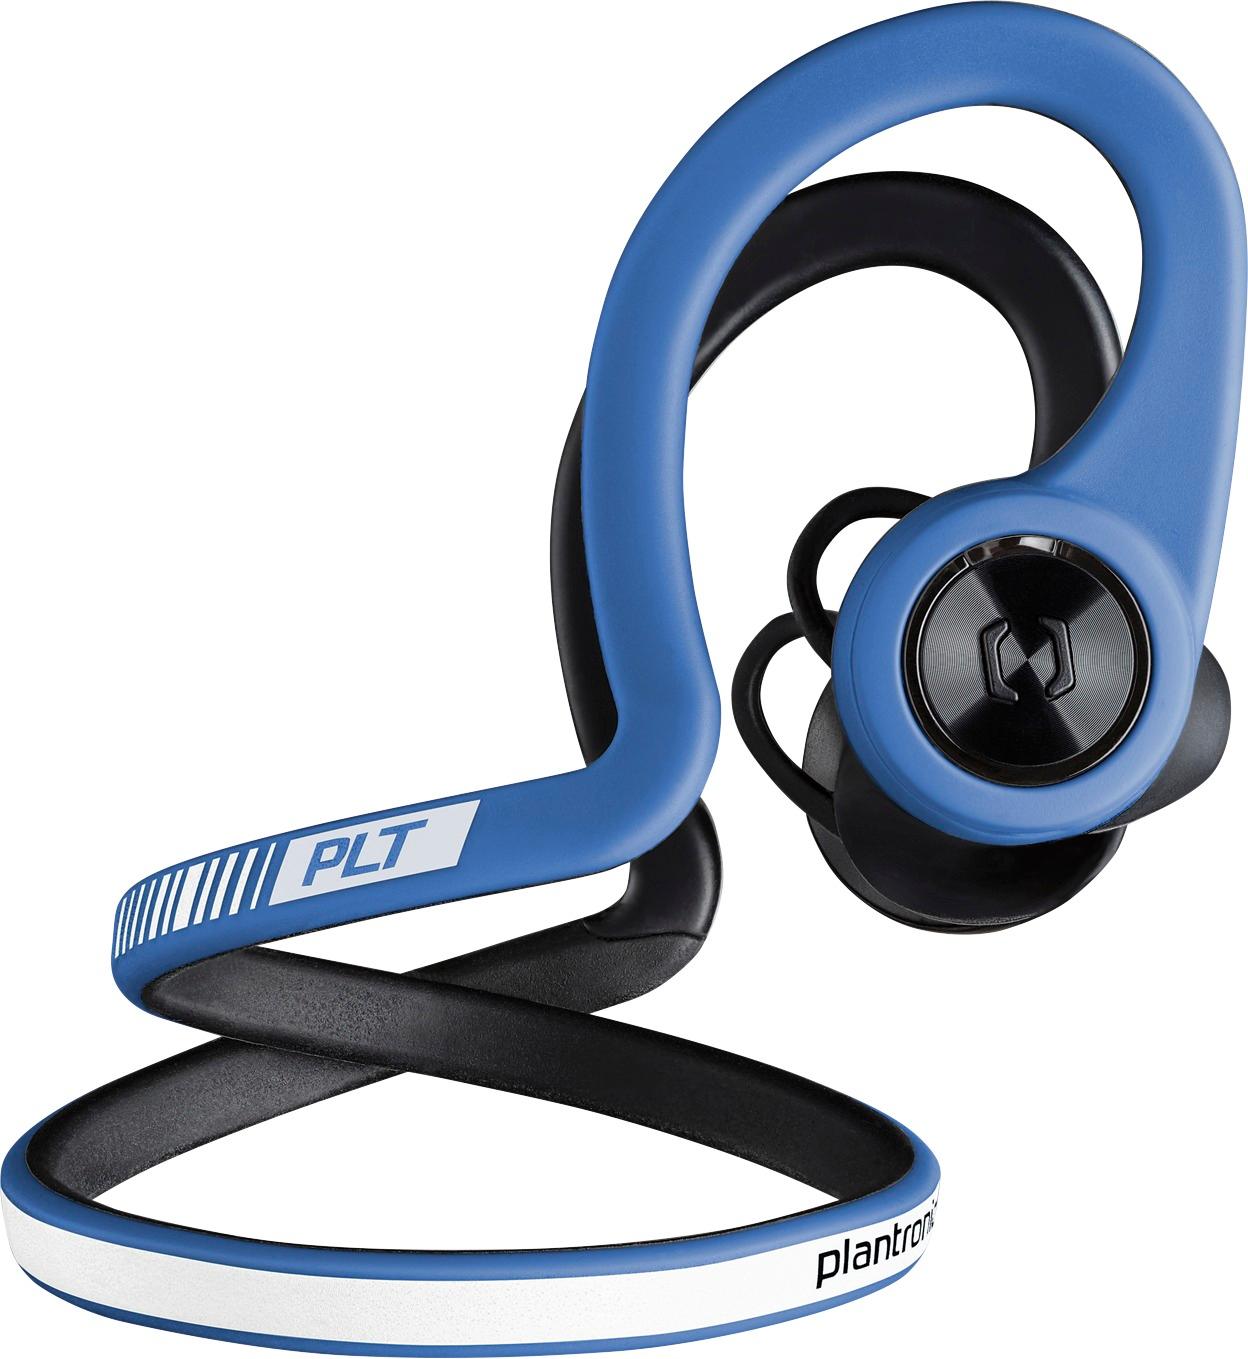 Questions And Answers Plantronics Backbeat Fit Wireless Sport